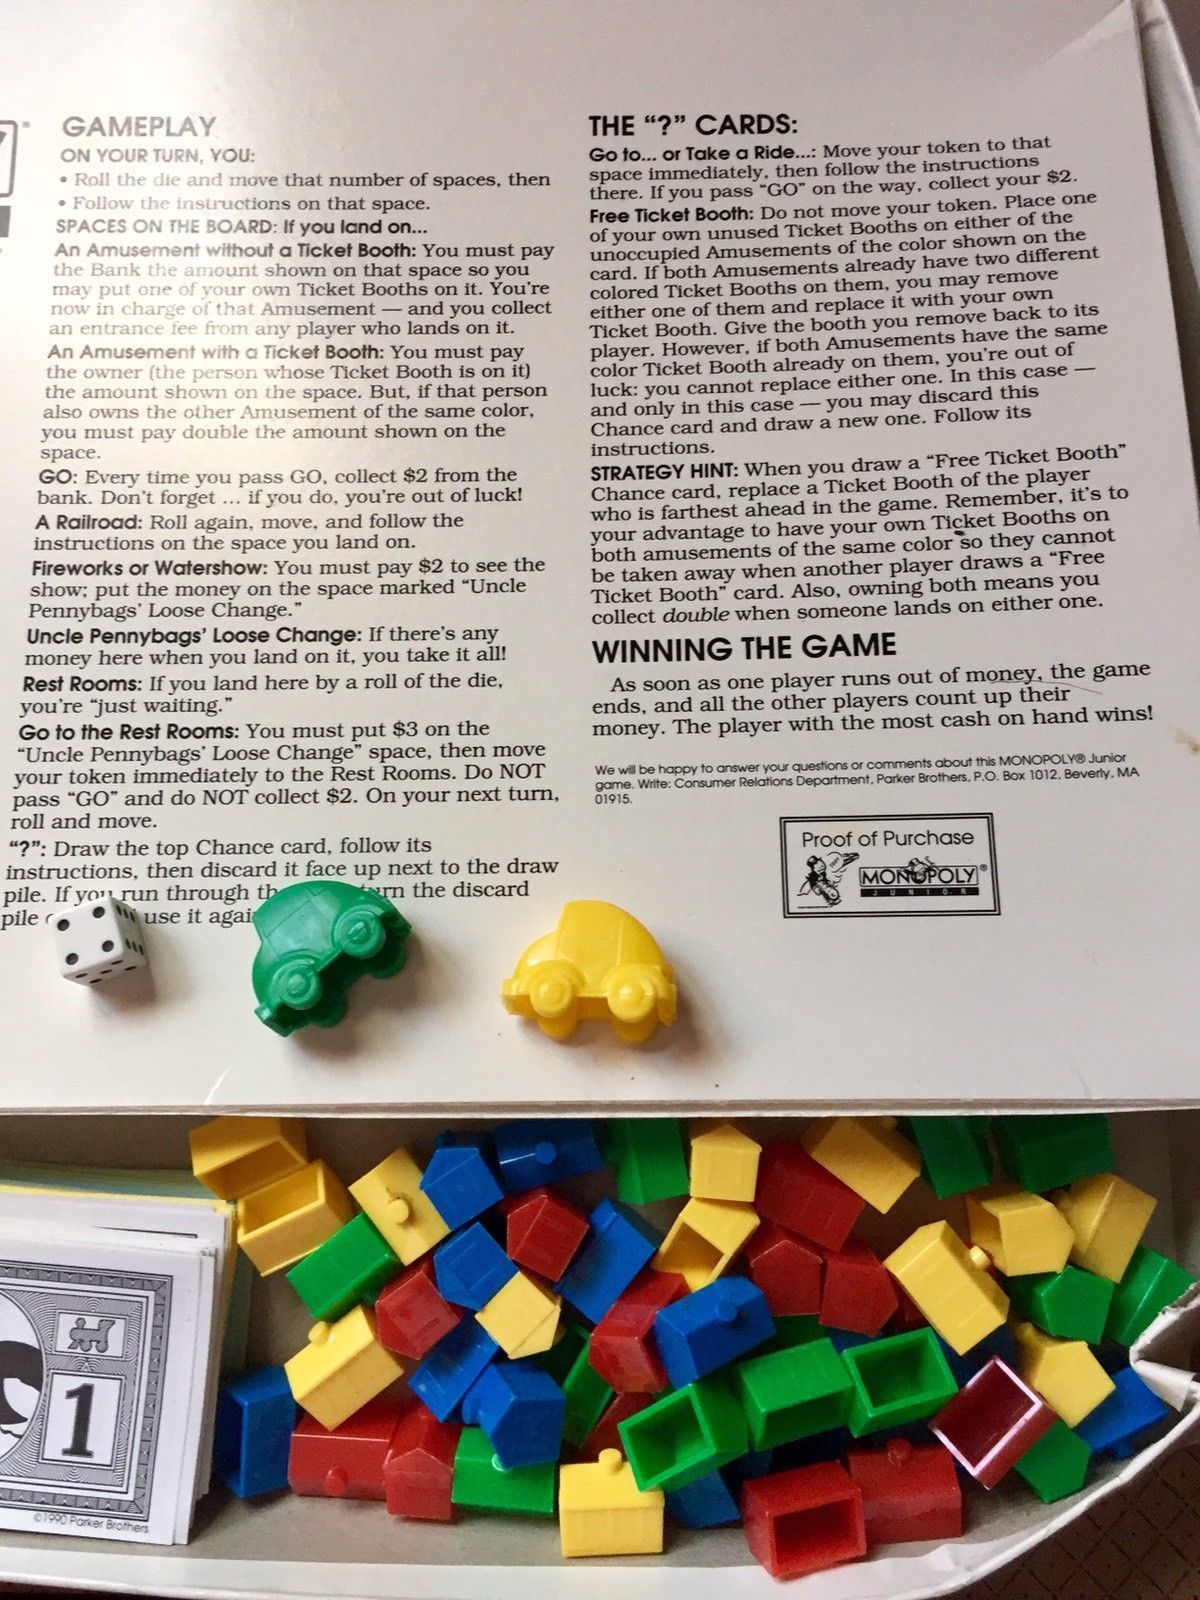 Details about   Board Game Parts: MONOPOLY JR replacement pieces junior Parker Brothers